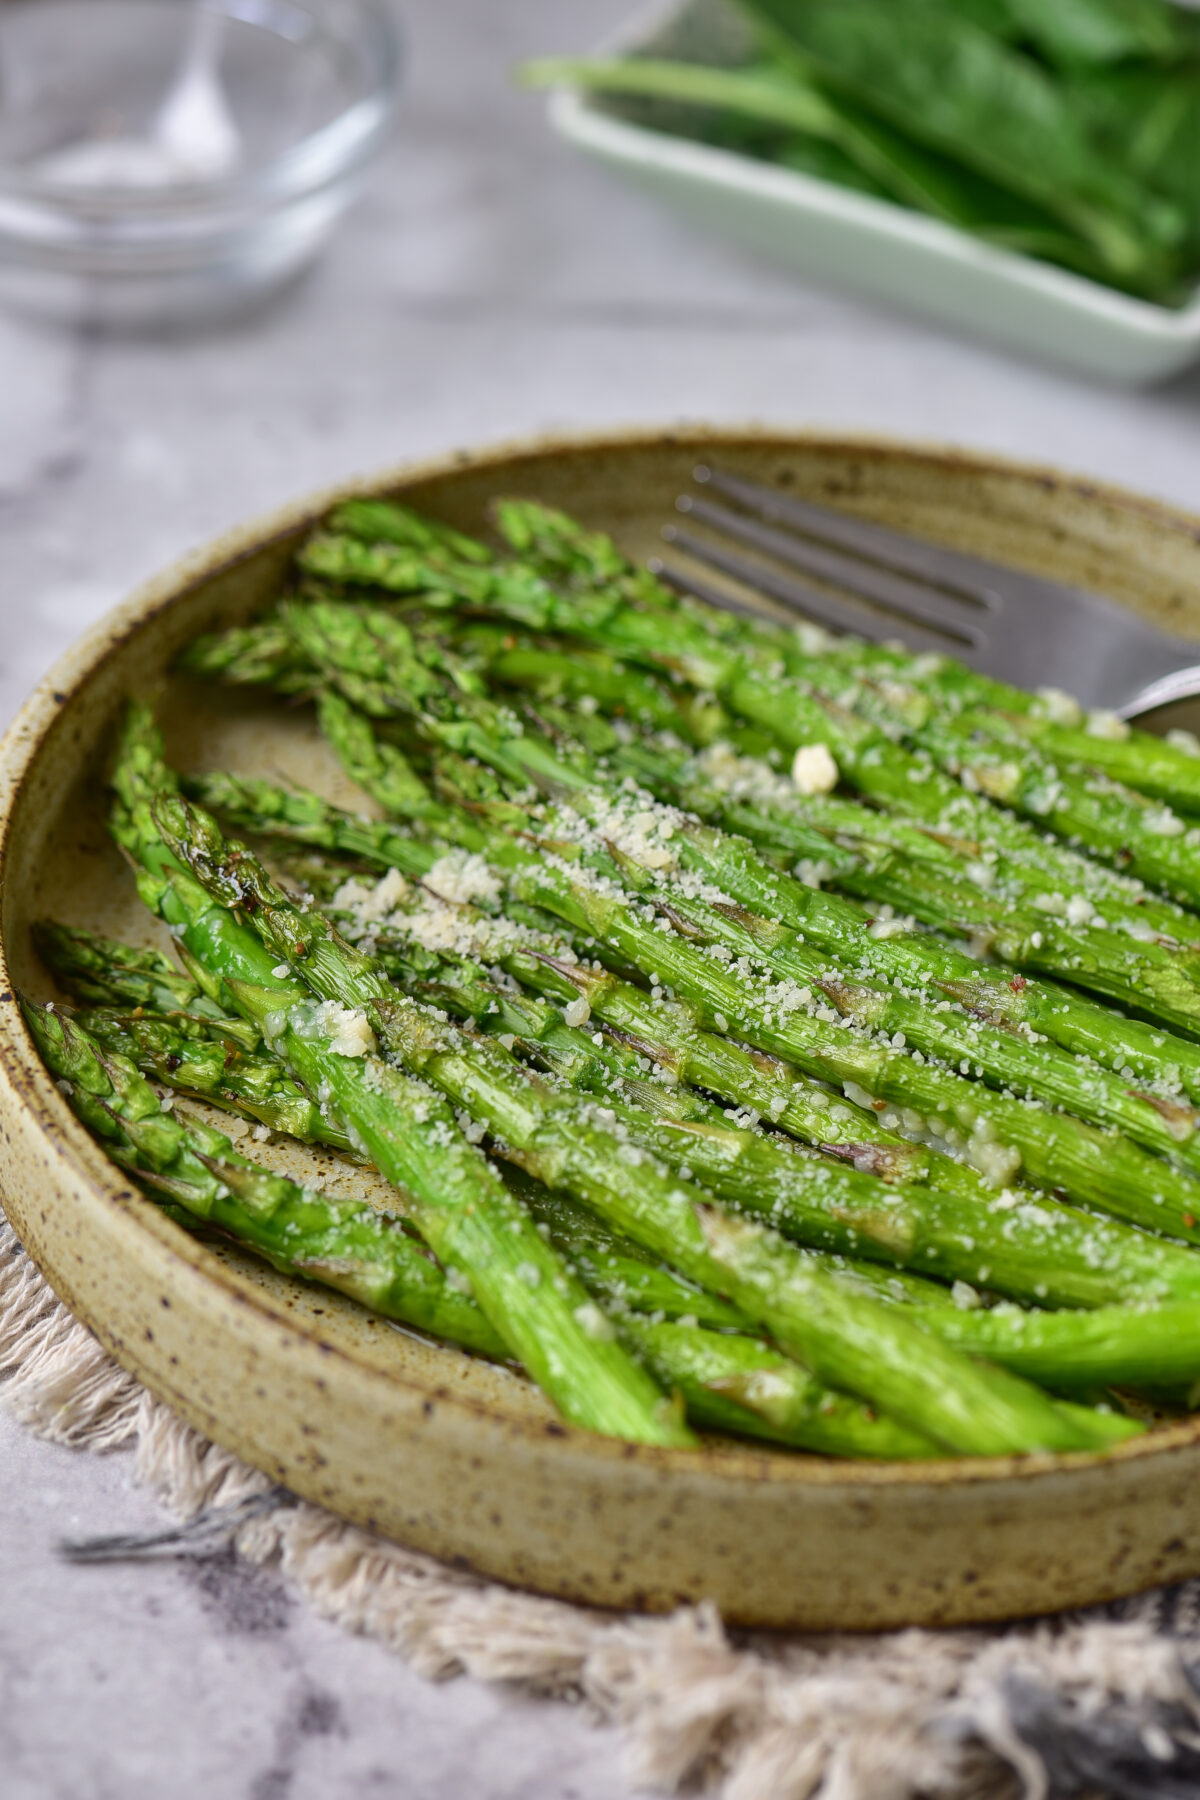 Enjoy perfect air fryer asparagus with our easy recipe for crisp, golden, and tasty asparagus. It's the ideal side dish for any occasion.